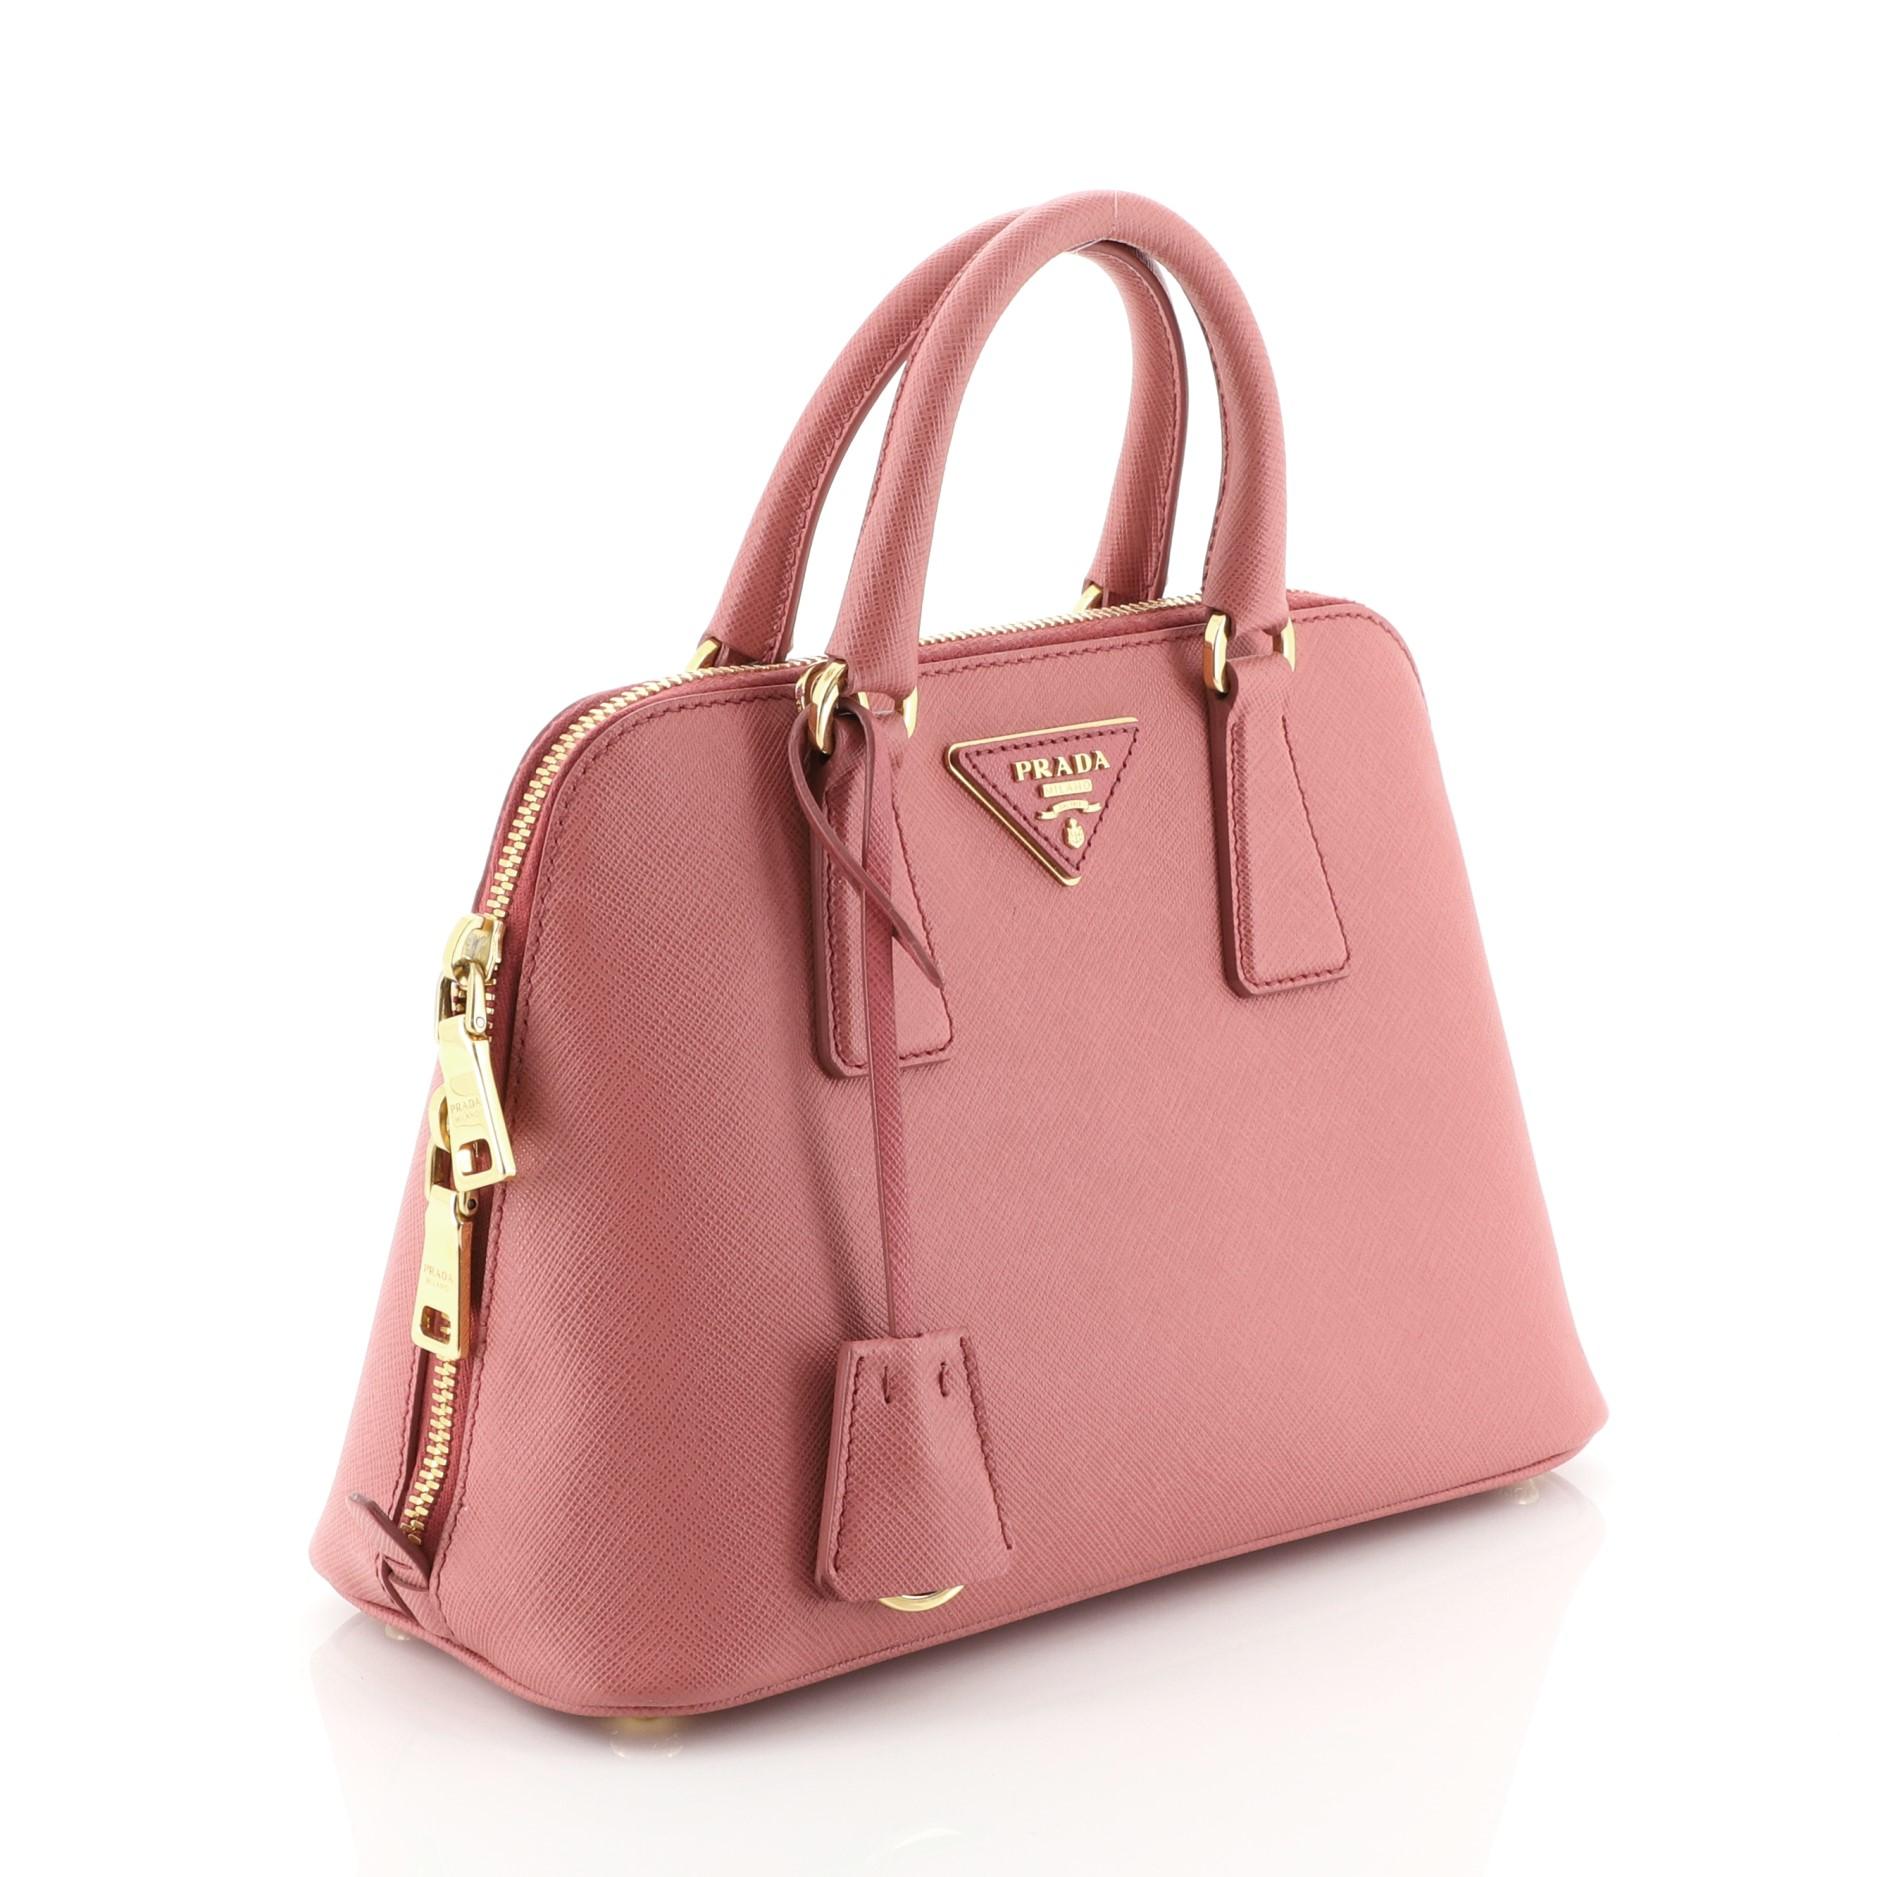 This Prada Promenade Bag Saffiano Leather Small, crafted from pink saffiano leather, features dual rolled handles, triangle Prada logo, and gold-tone hardware. Its two-way zip closure opens to a pink fabric interior with a center zip compartment and